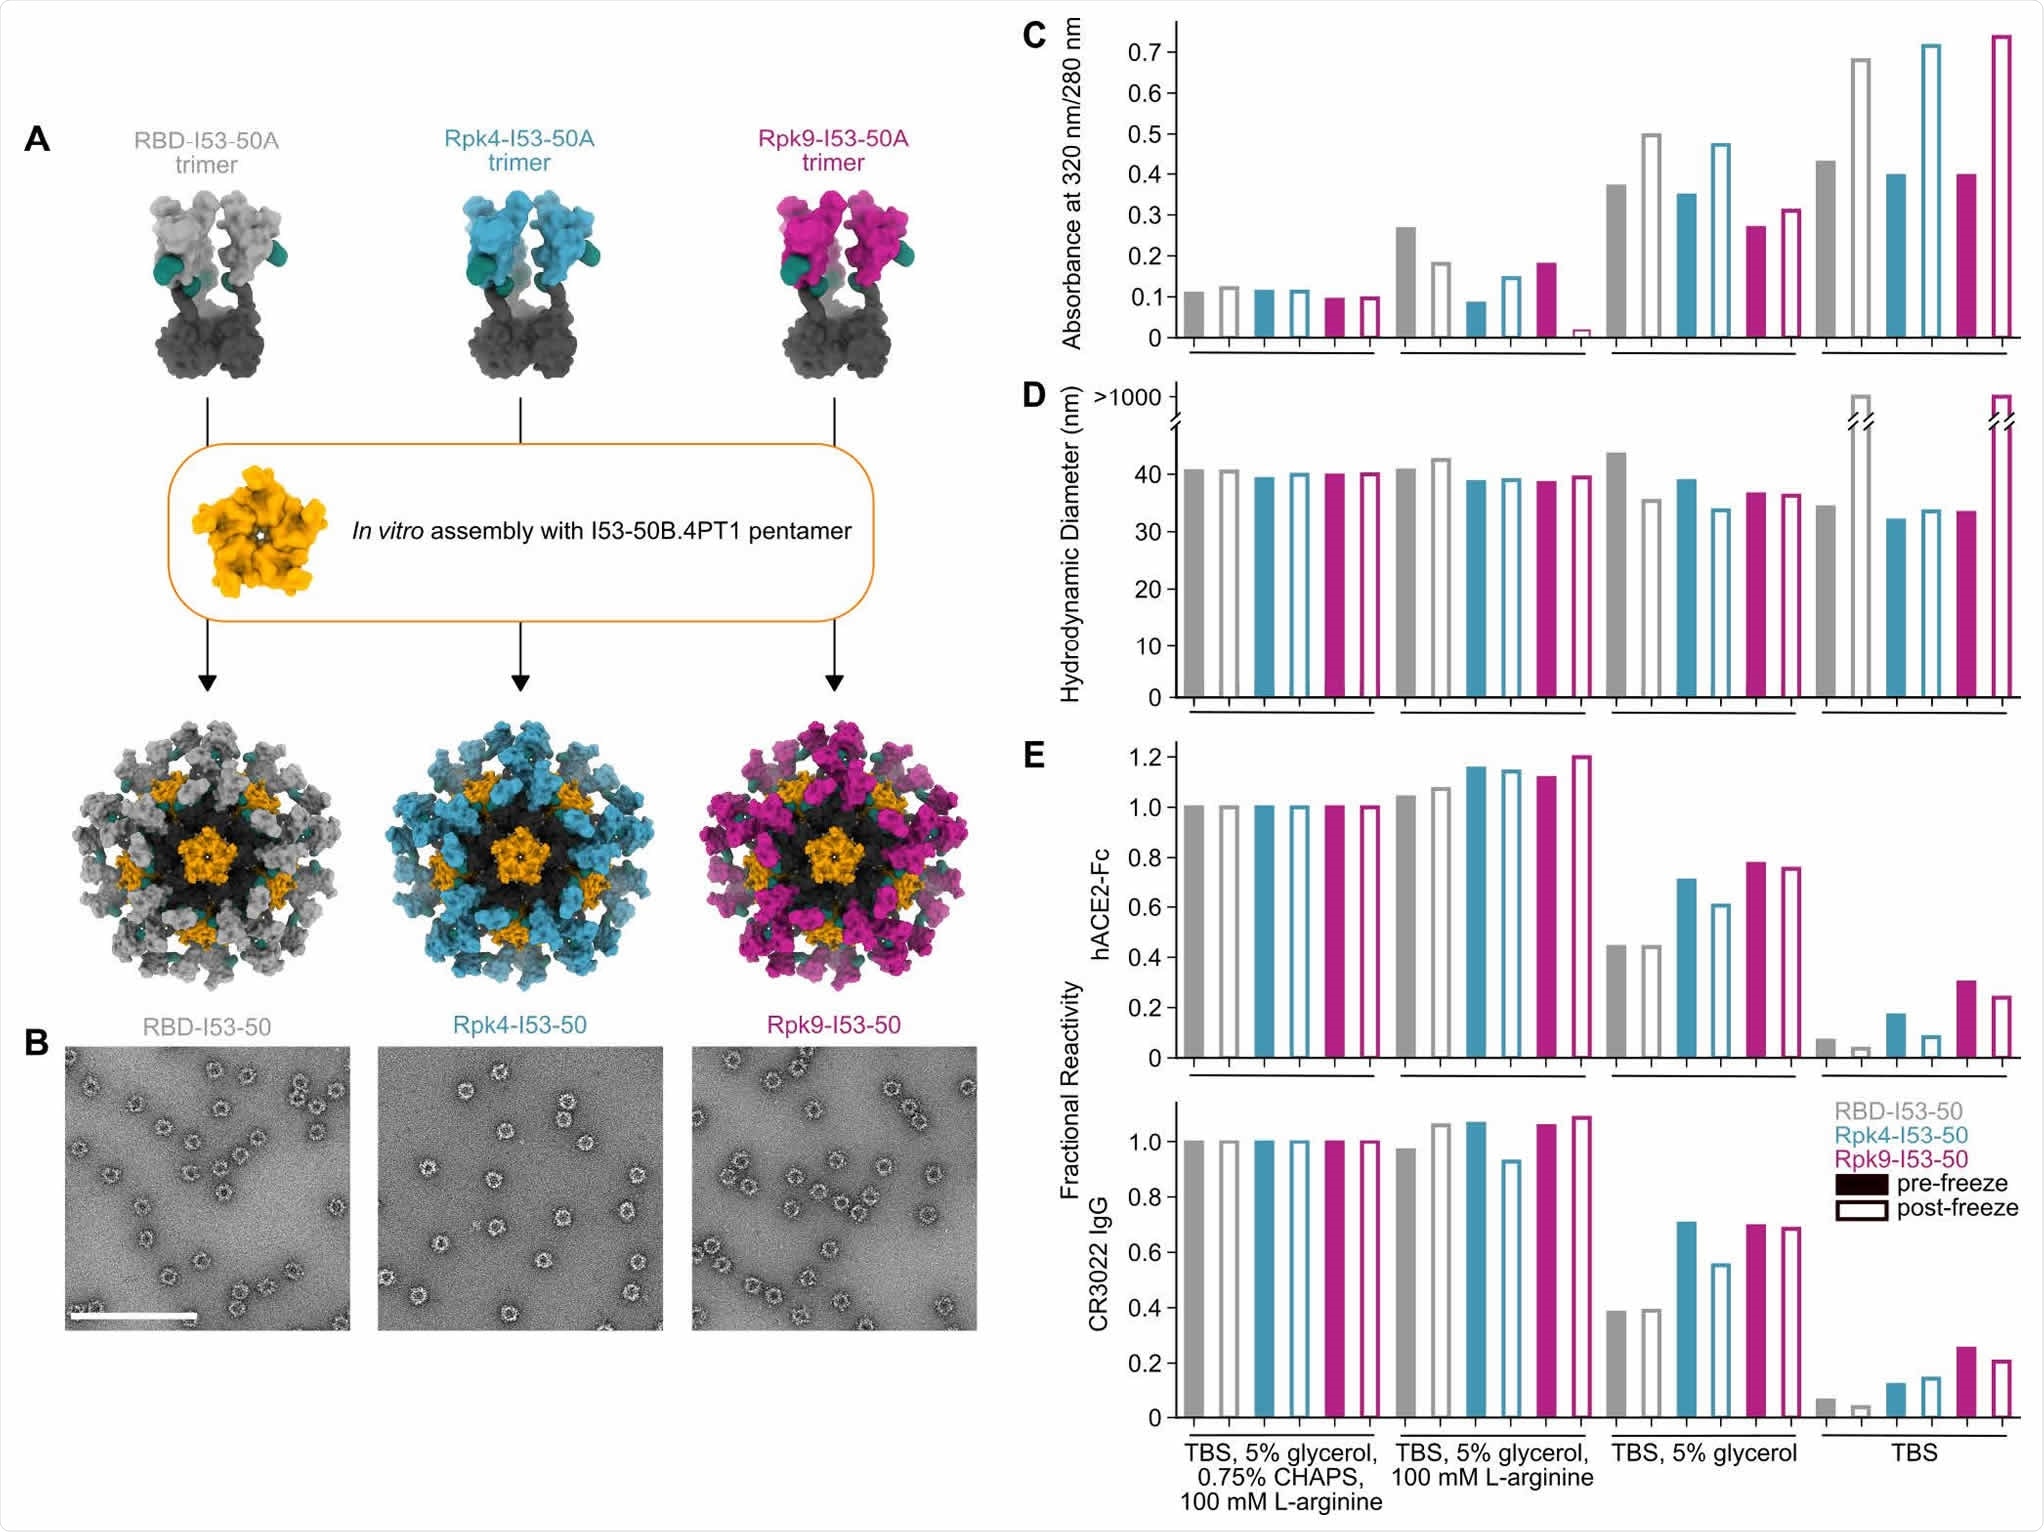 Stabilized RBDs presented on assembled I53-50 nanoparticles enhance solution stability compared to the wild-type RBD. (A) Schematic of assembly of I53-50 nanoparticle immunogens displaying RBD antigens. (B) nsEM of RBD-I53-50, Rpk4-I53-50, and Rpk9-I53-50 (scale bar, 200 nm). (C-E) show summarized quality control results for RBD-I53-50, Rpk4-I53-50, and Rpk9-I53-50 before and after a single freeze/thaw cycle in four different buffers. Complete data available in Supplementary Information 3. (C) The ratio of absorbance at 320 to 280 nm in UV-Vis spectra, an indicator of the presence of soluble aggregates. (D) DLS measurements, which monitor both proper nanoparticle assembly and formation of aggregates. (E) Fractional reactivity of I53-50 nanoparticle immunogens against immobilized hACE2-Fc receptor (top) and CR3022 (bottom). The pre-freeze and post-freeze data were separately normalized to the respective CHAPS-containing samples for each nanoparticle.